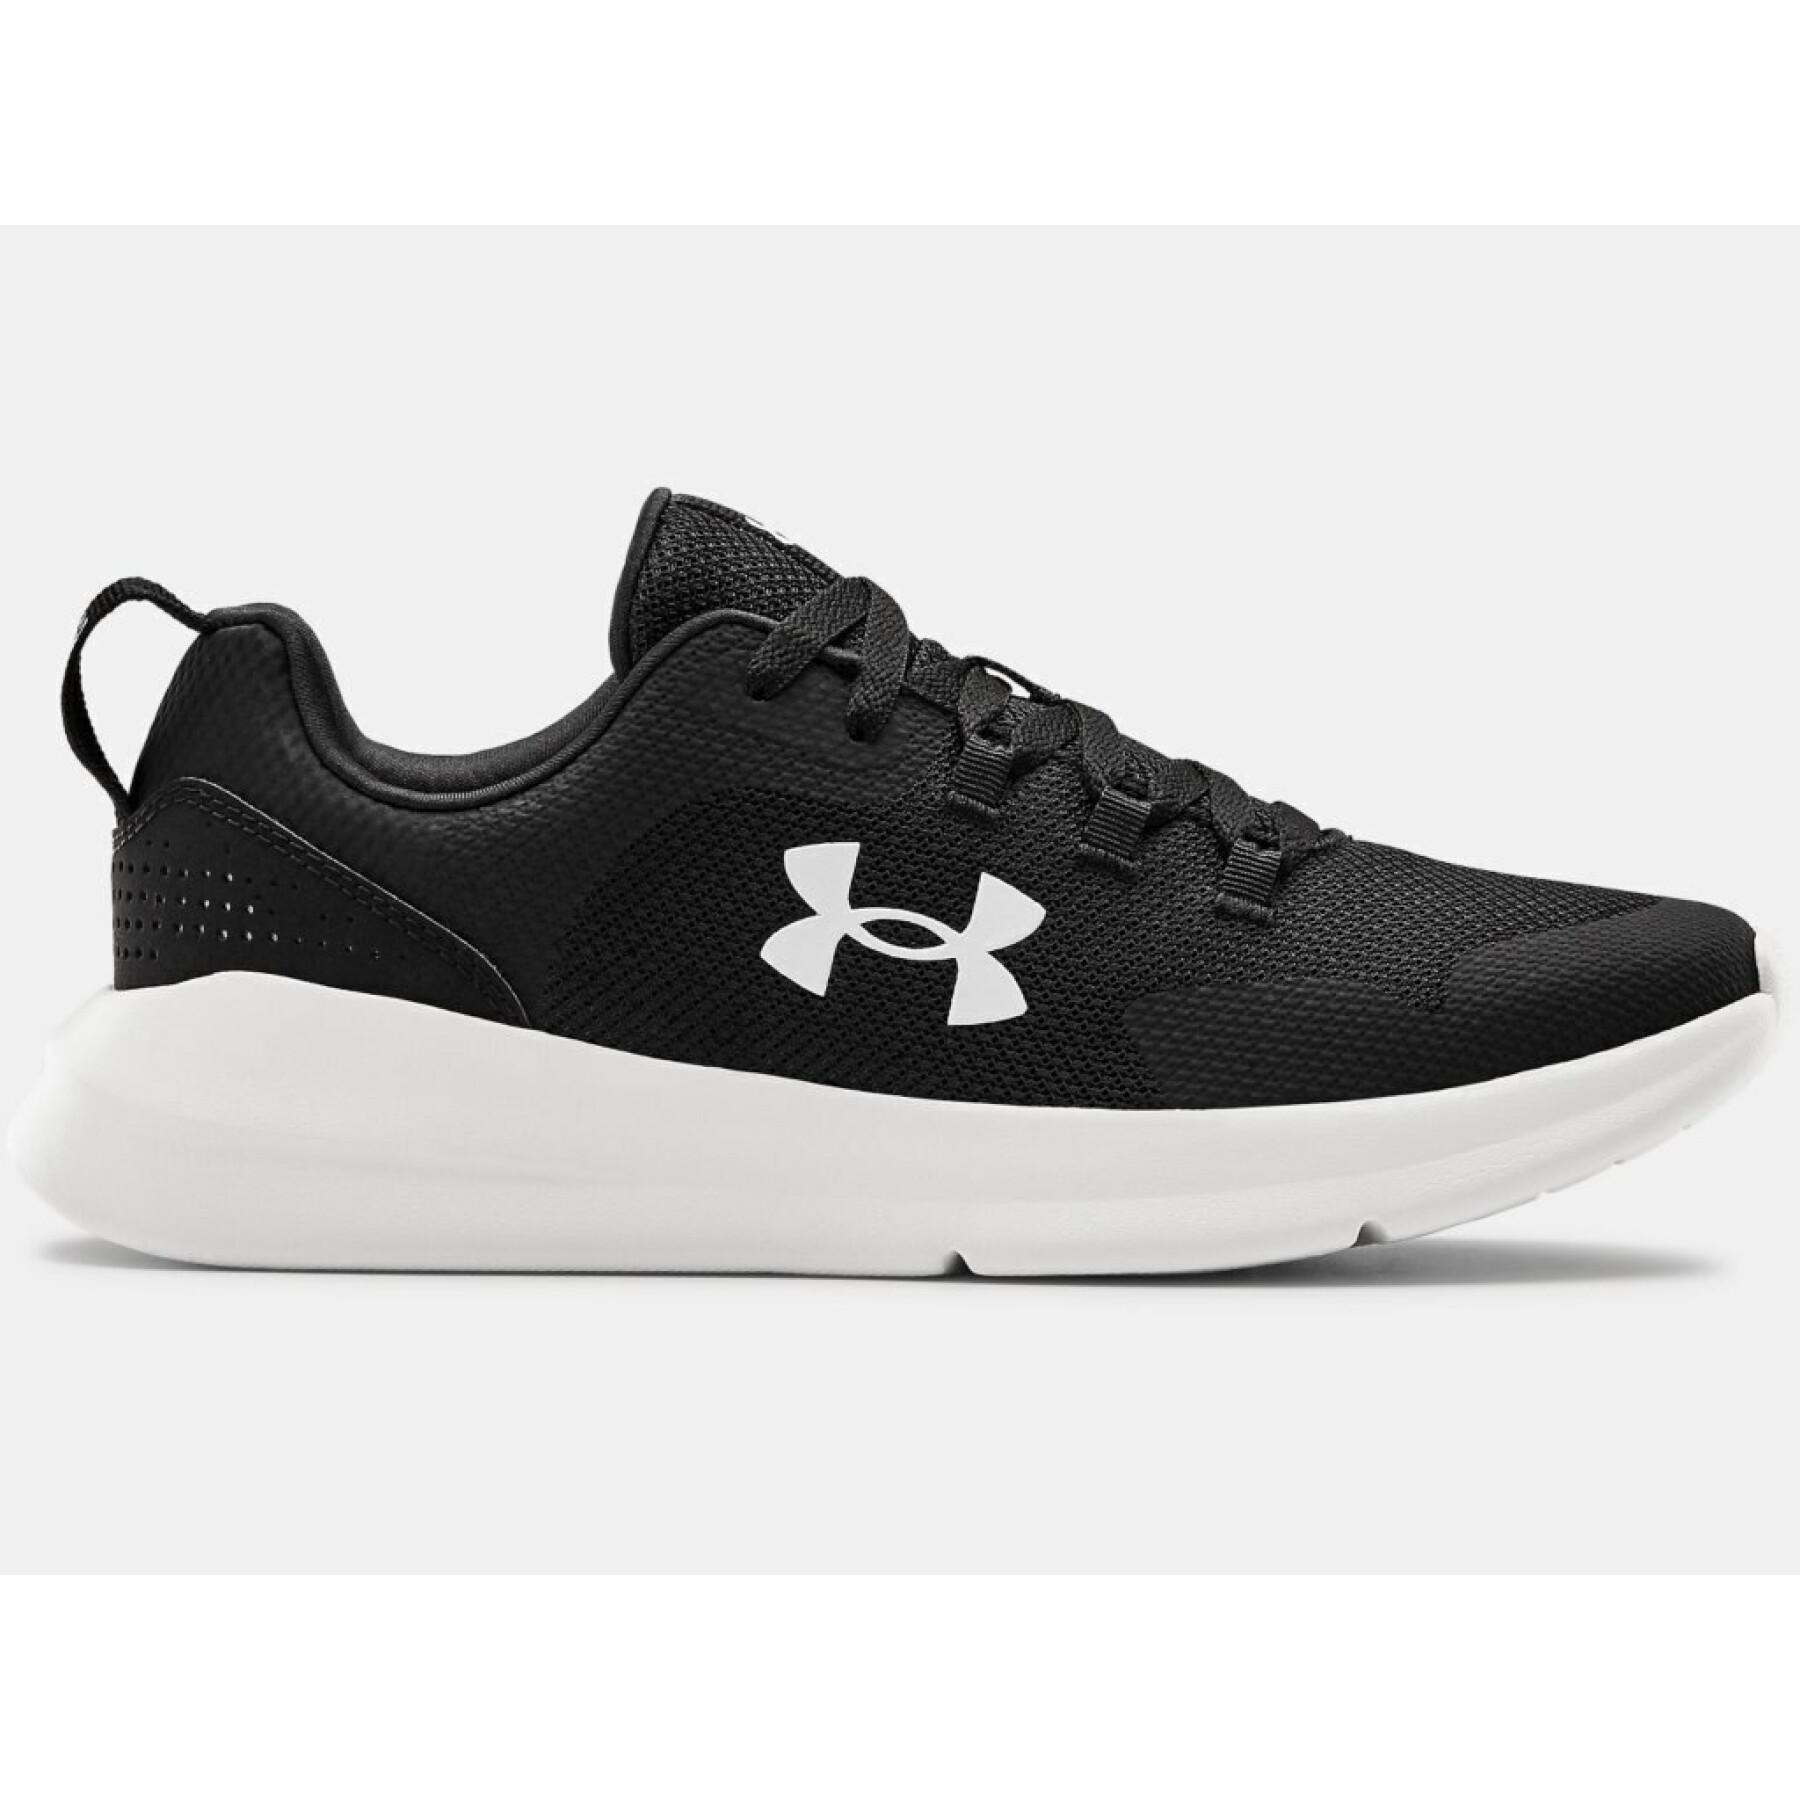 Sneaker Under Armour Essential Sportstyle